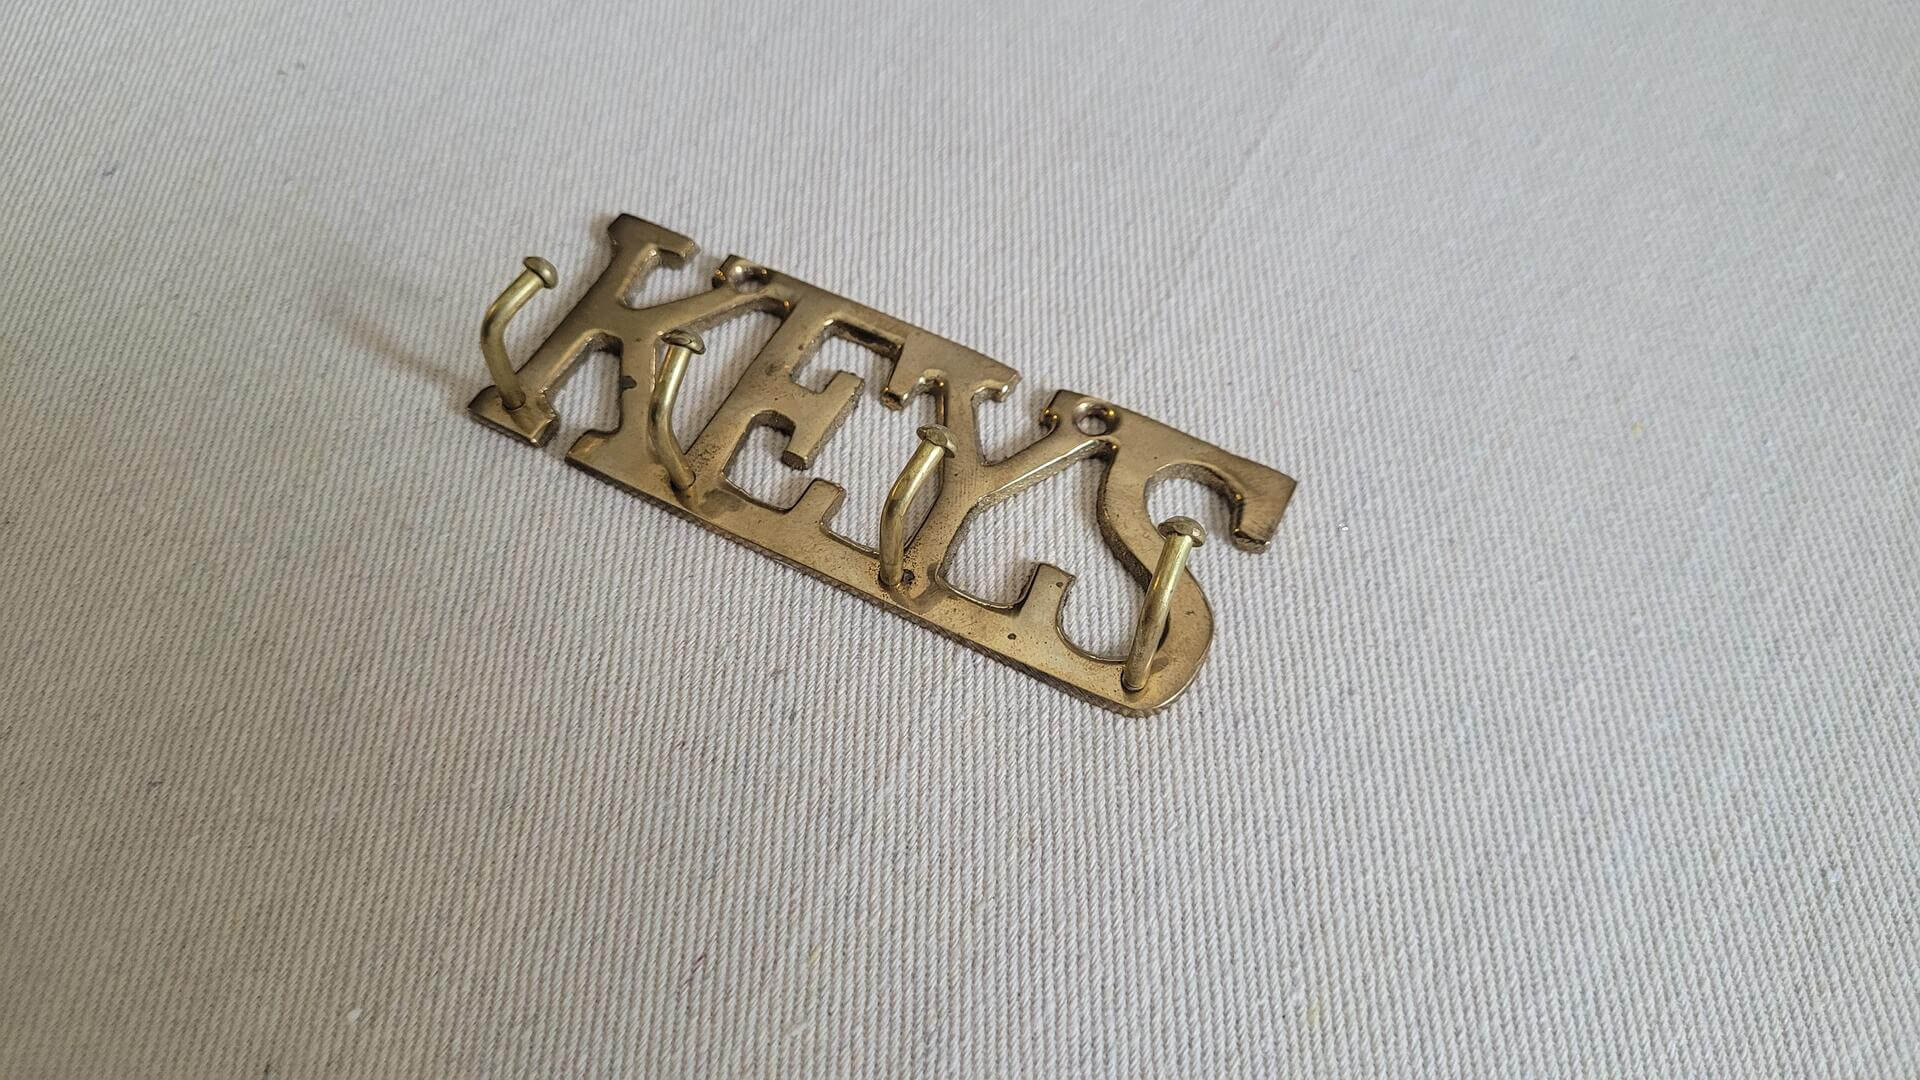 Vintage solid brass wall mount “KEYS” keyhook with holes for screws and 4 hooks to hang keys on. Retro collectible wall decor and house decorative accessories